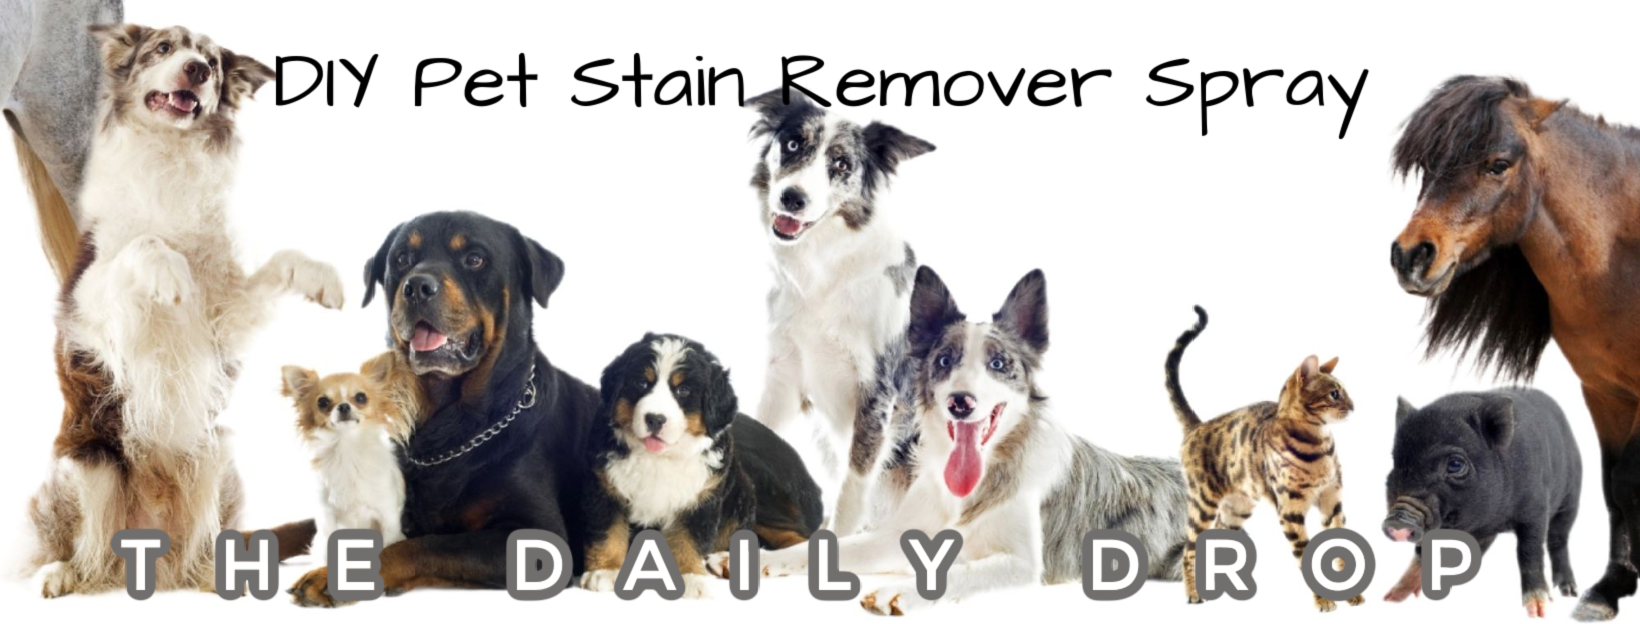 DIY Pet Stain Remover Spray | From Sandy